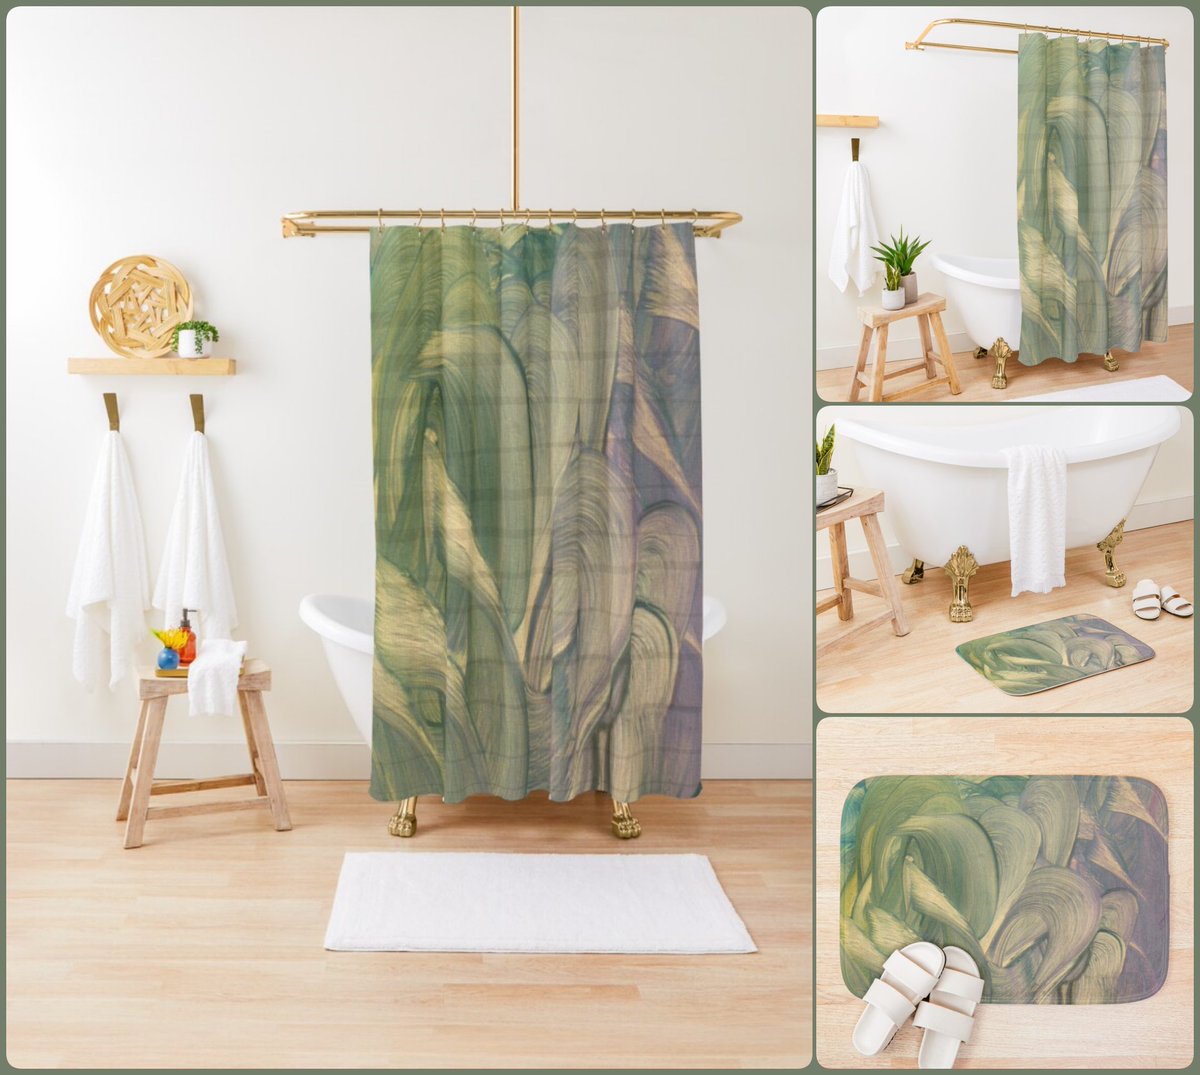 Eight of Swords Shower Curtain~ by Art Falaxy
~Be Artful~ #accents #homedecor #art #artfalaxy #bathmats #blankets #comforters #duvets #pillows #redbubble #shower #trendy #modern #gifts #FindYourThing #purple #green

redbubble.com/i/shower-curta…